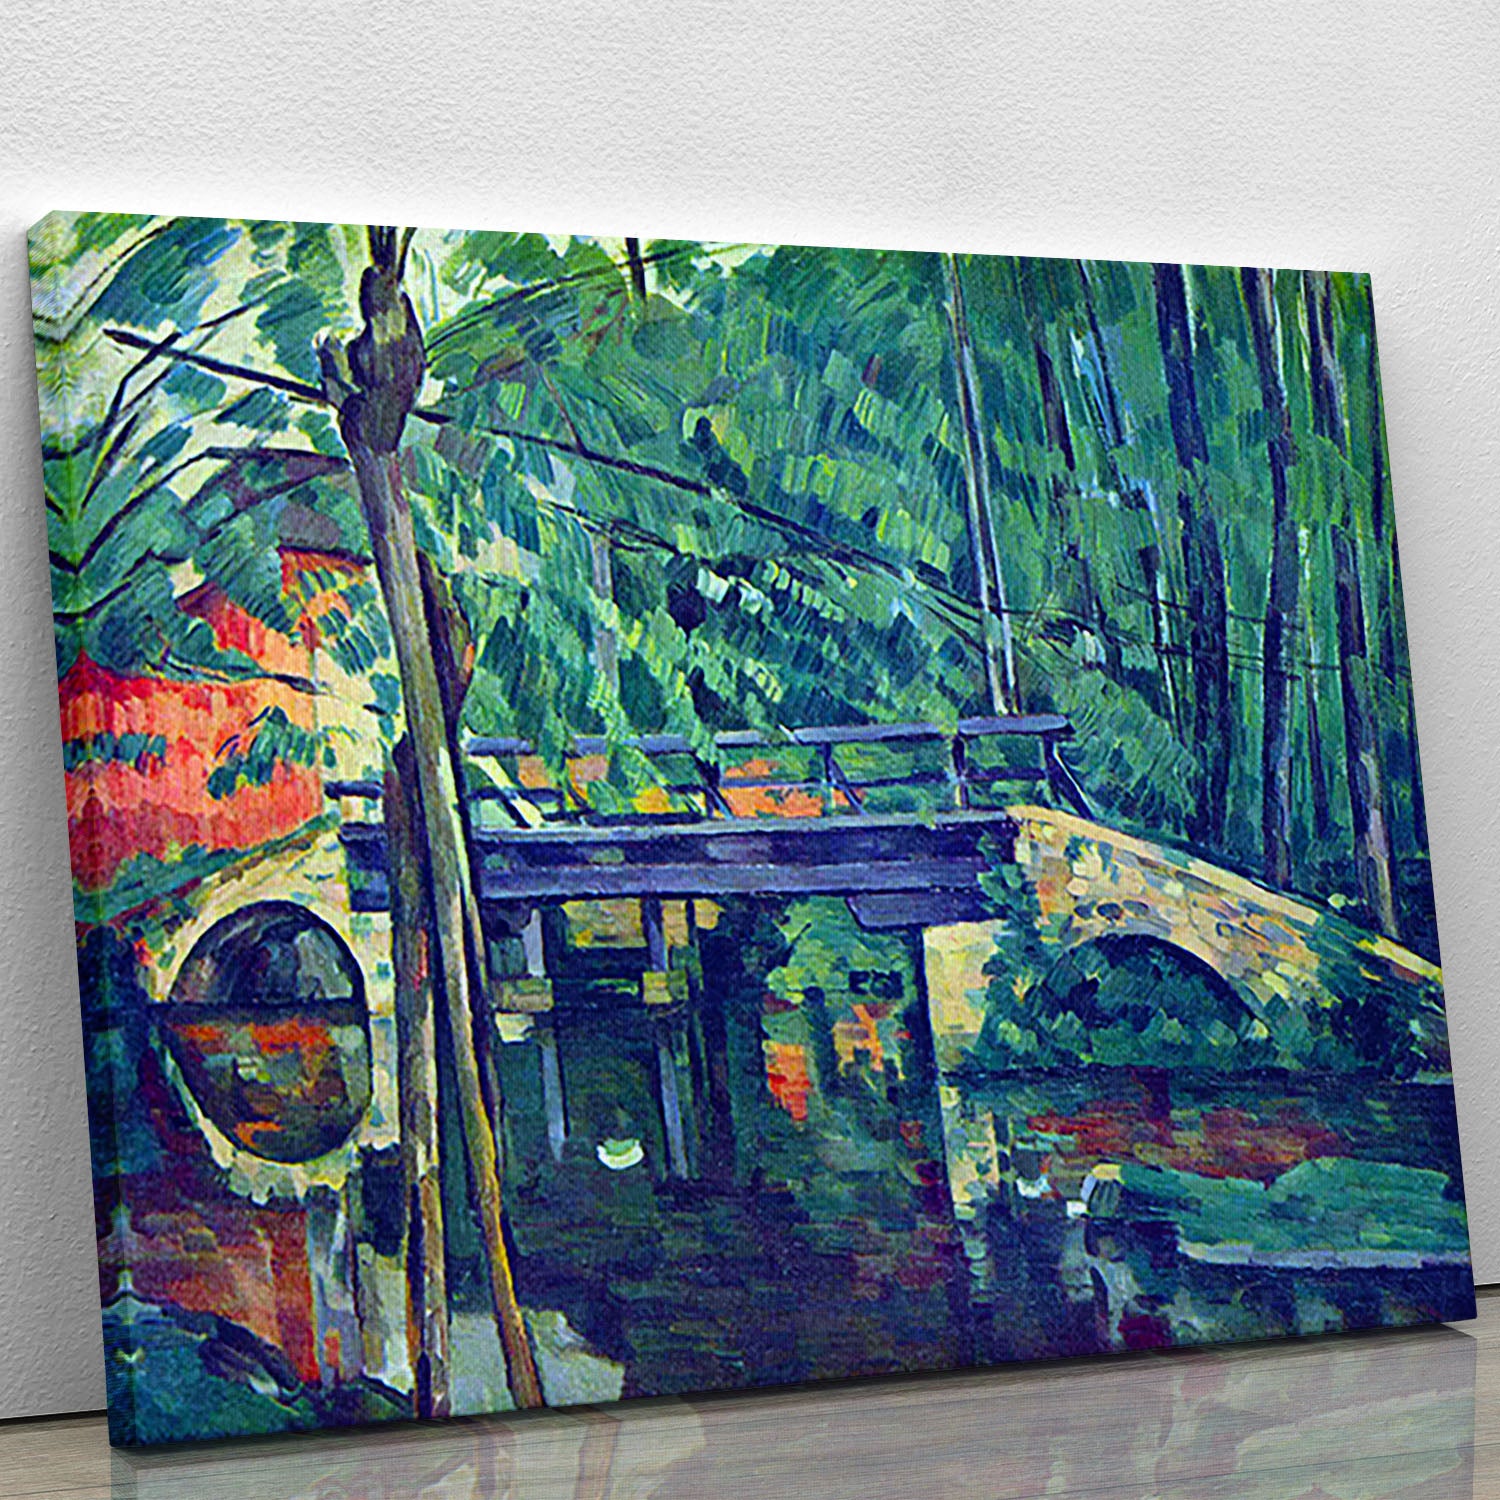 Bridge in the forest by Cezanne Canvas Print or Poster - Canvas Art Rocks - 1